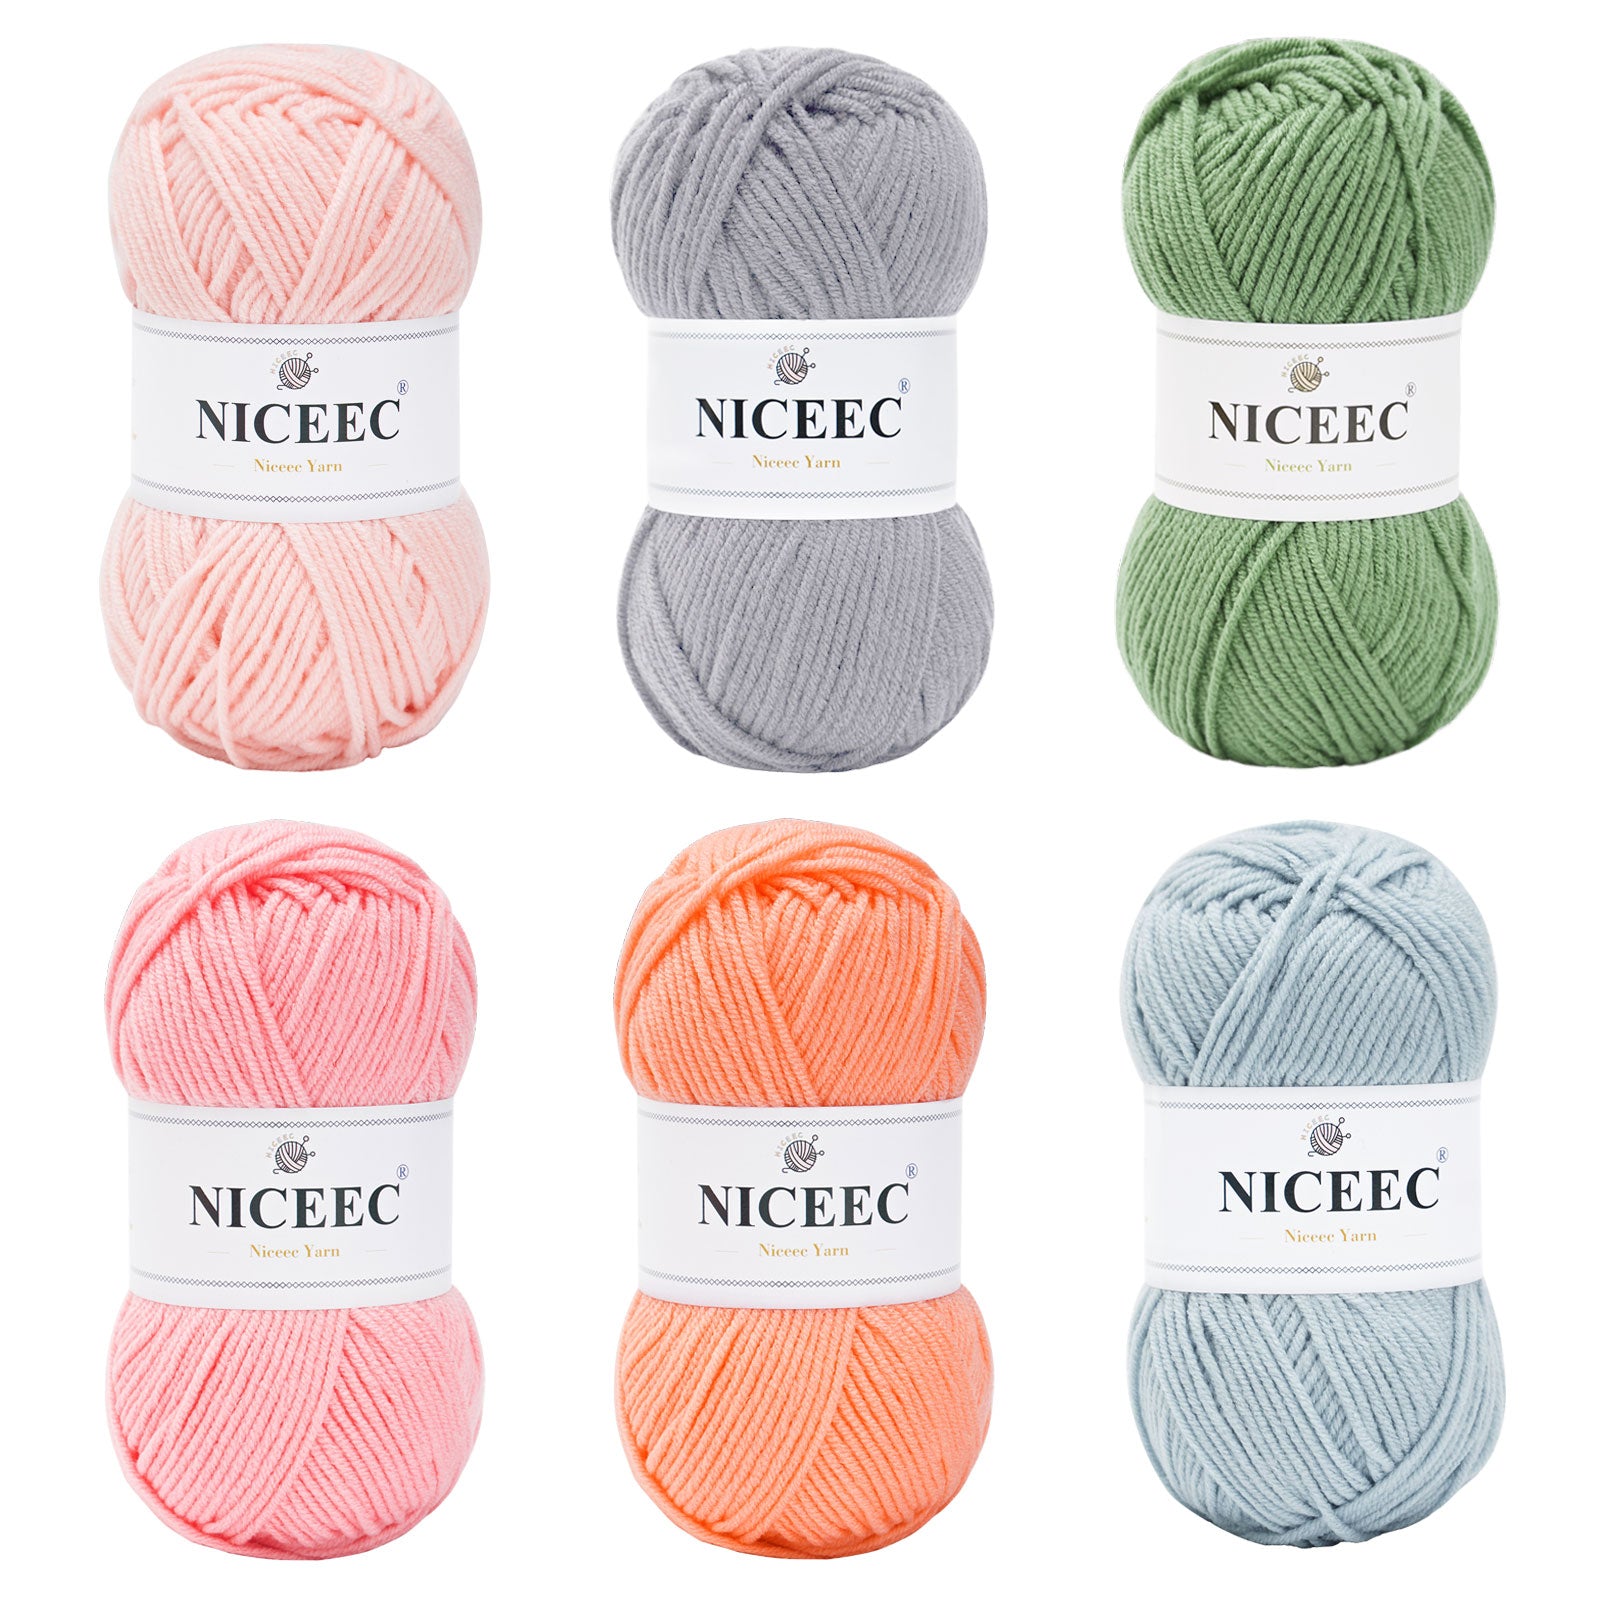 NICEEC 6×50g Soft Assorted Colors Yarn Sport Weight Yarn Bonbons Yarn for Crochet Knit 4 Ply Acrylic Yarn for DIY Project Starter Crochet Kit for Kids or Adults(6×145yds)